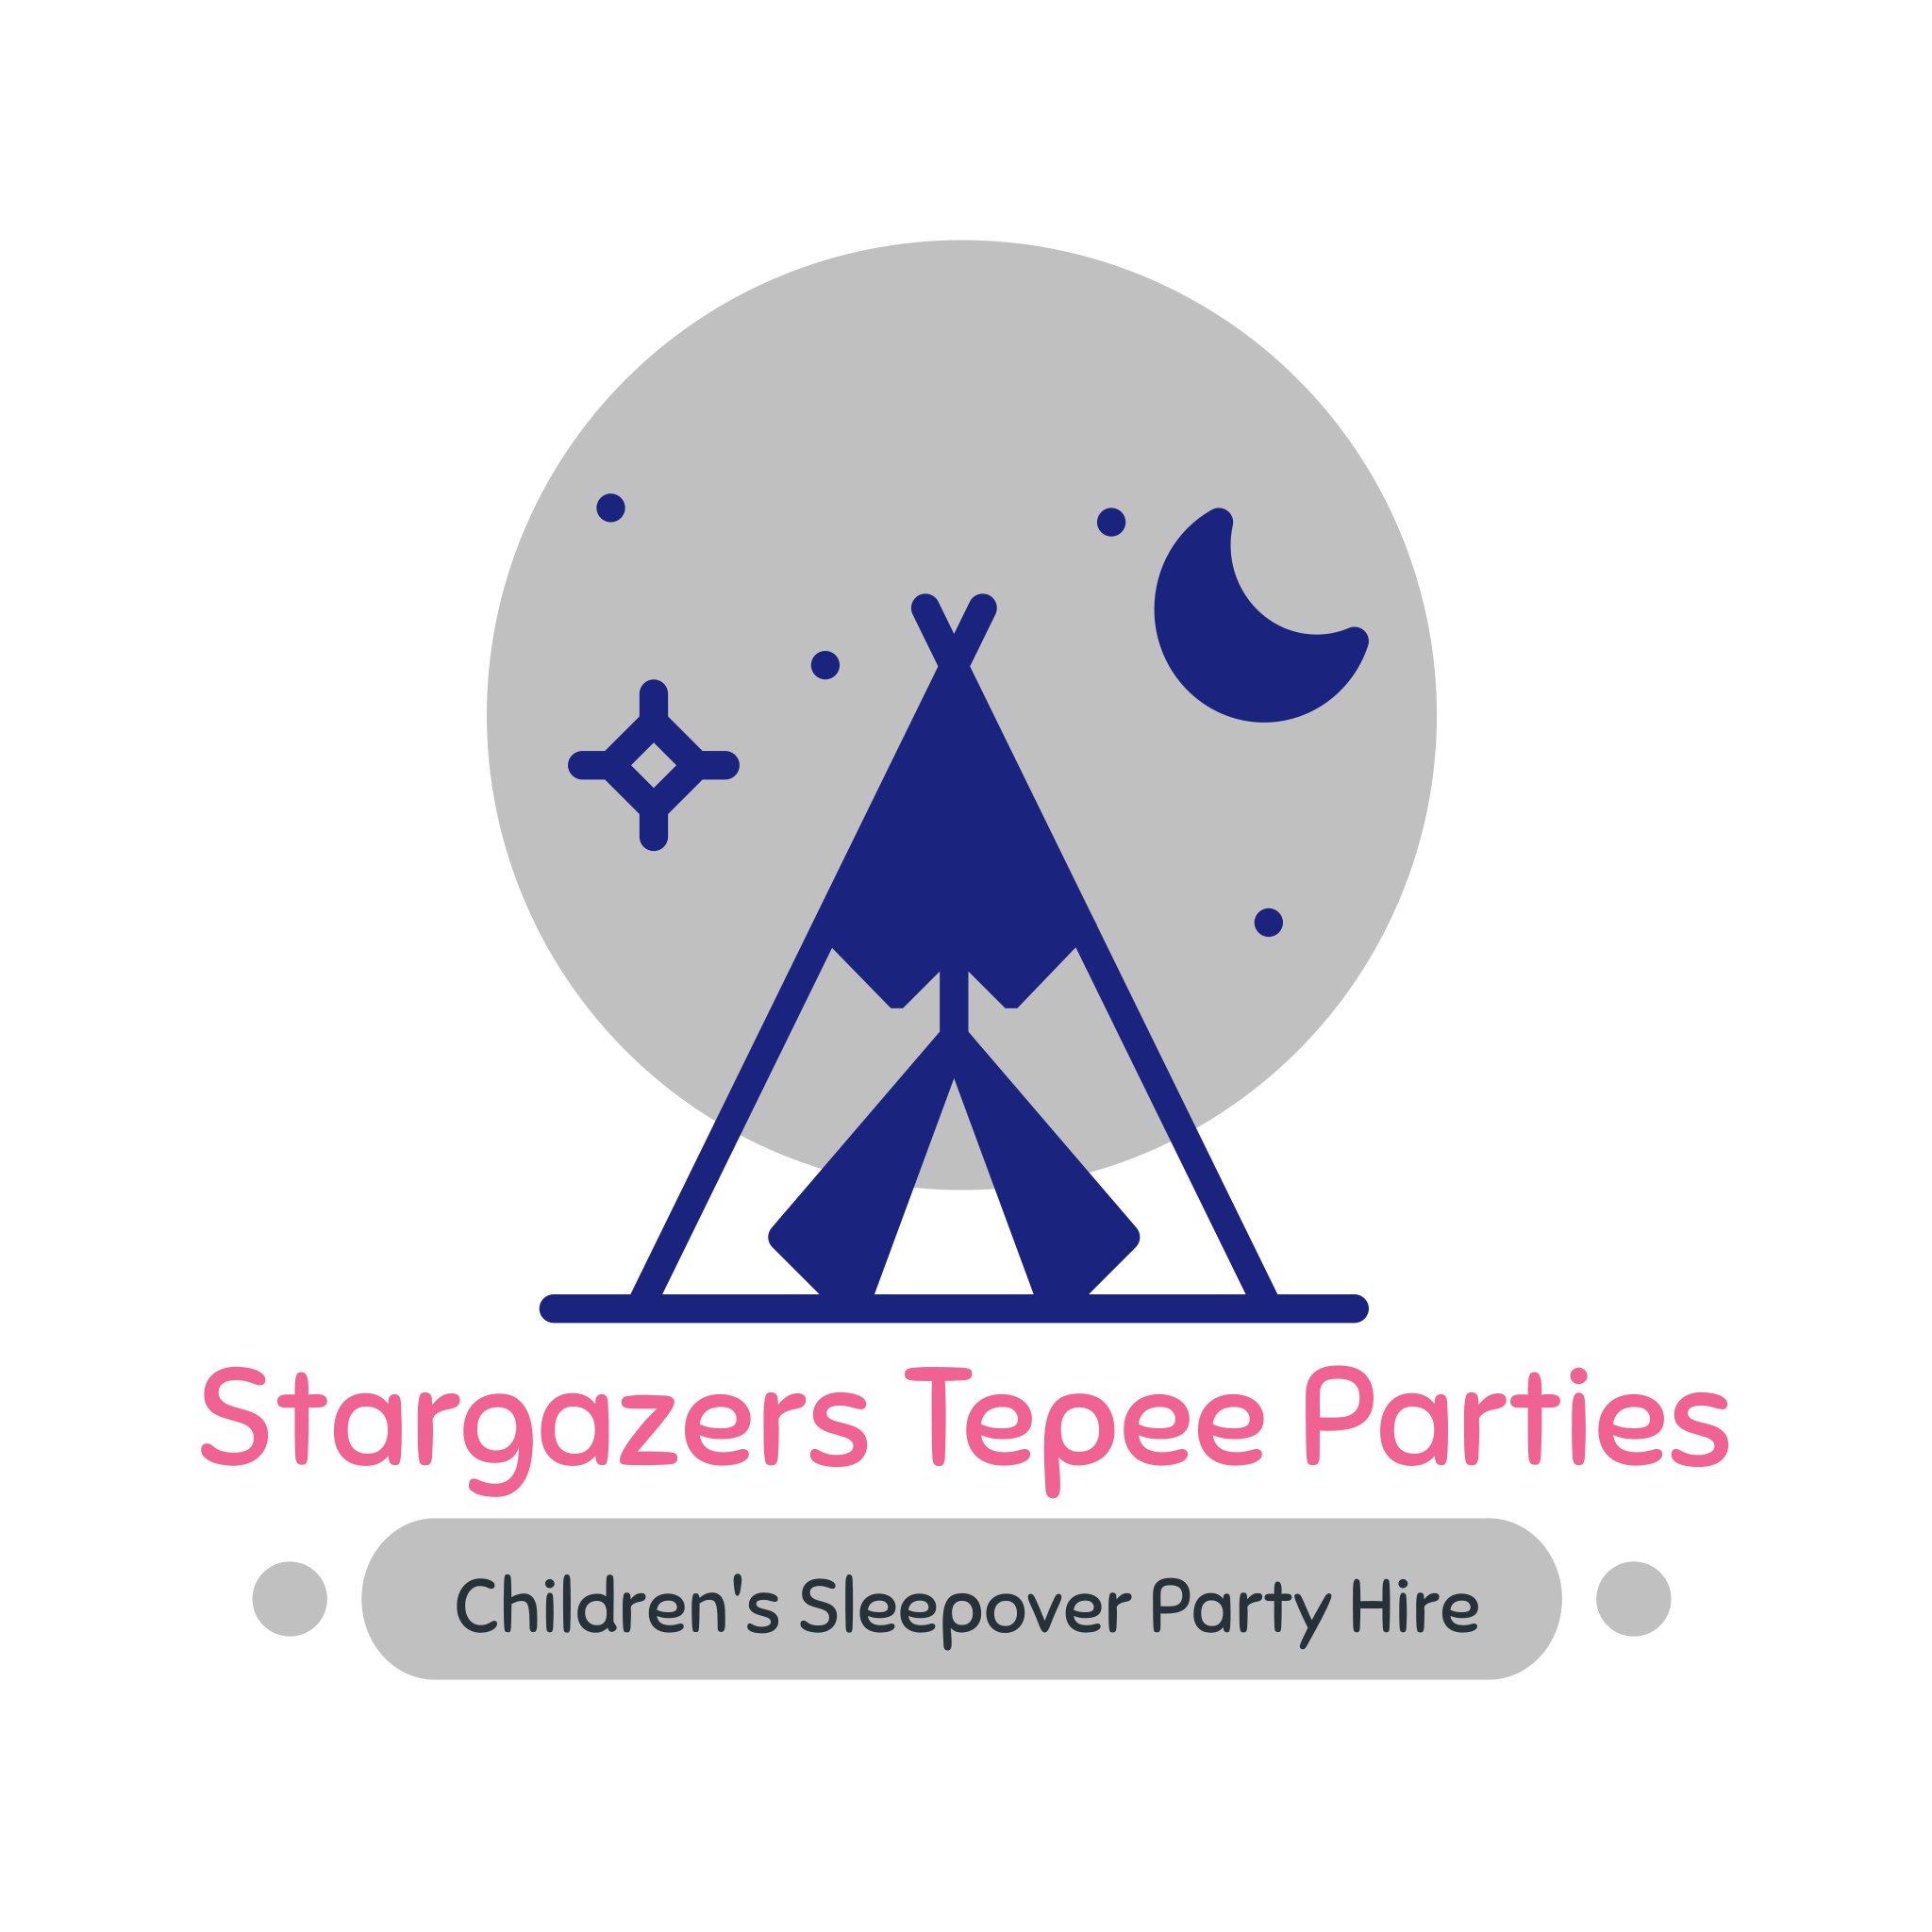 Stargazers is new, vibrant, professional local business which creates lasting memories, inspiring experiences and a flawless service.
#sleepover #tepee #party